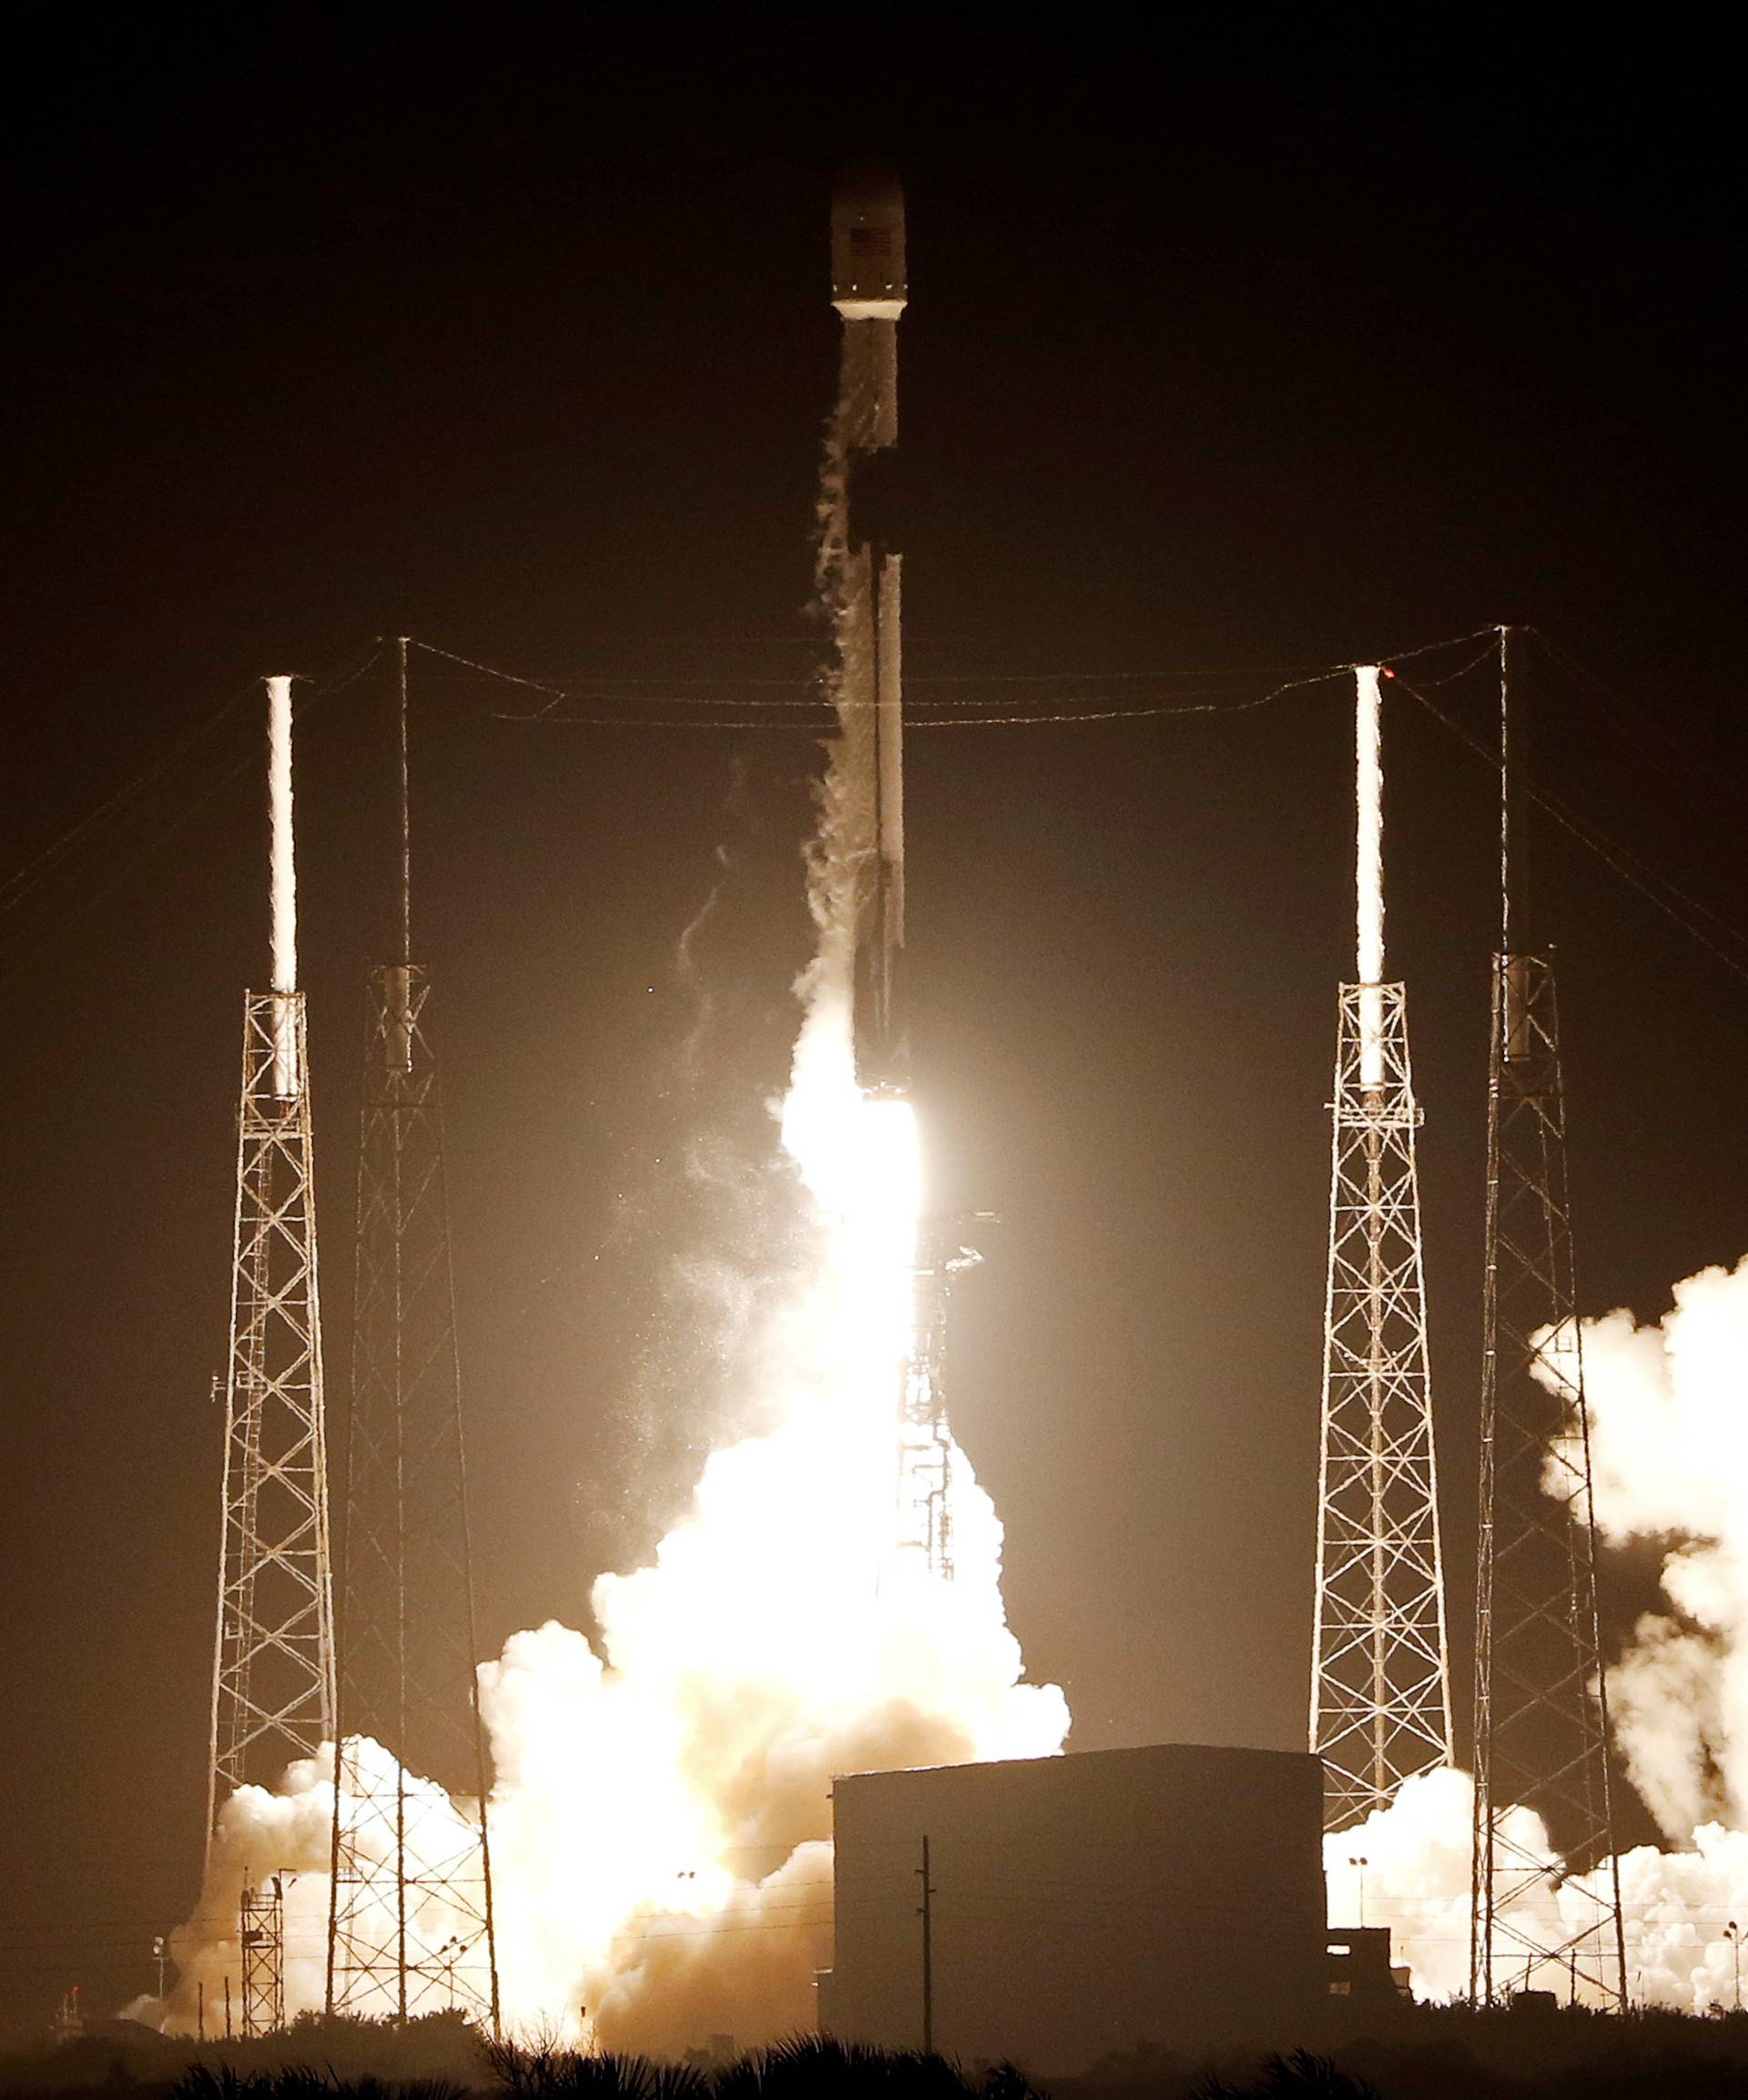 A SpaceX Falcon 9 rocket carrying Israel's first spacecraft designed to land on the moon lifts off on the first privately-funded lunar mission at the Cape Canaveral Air Force Station